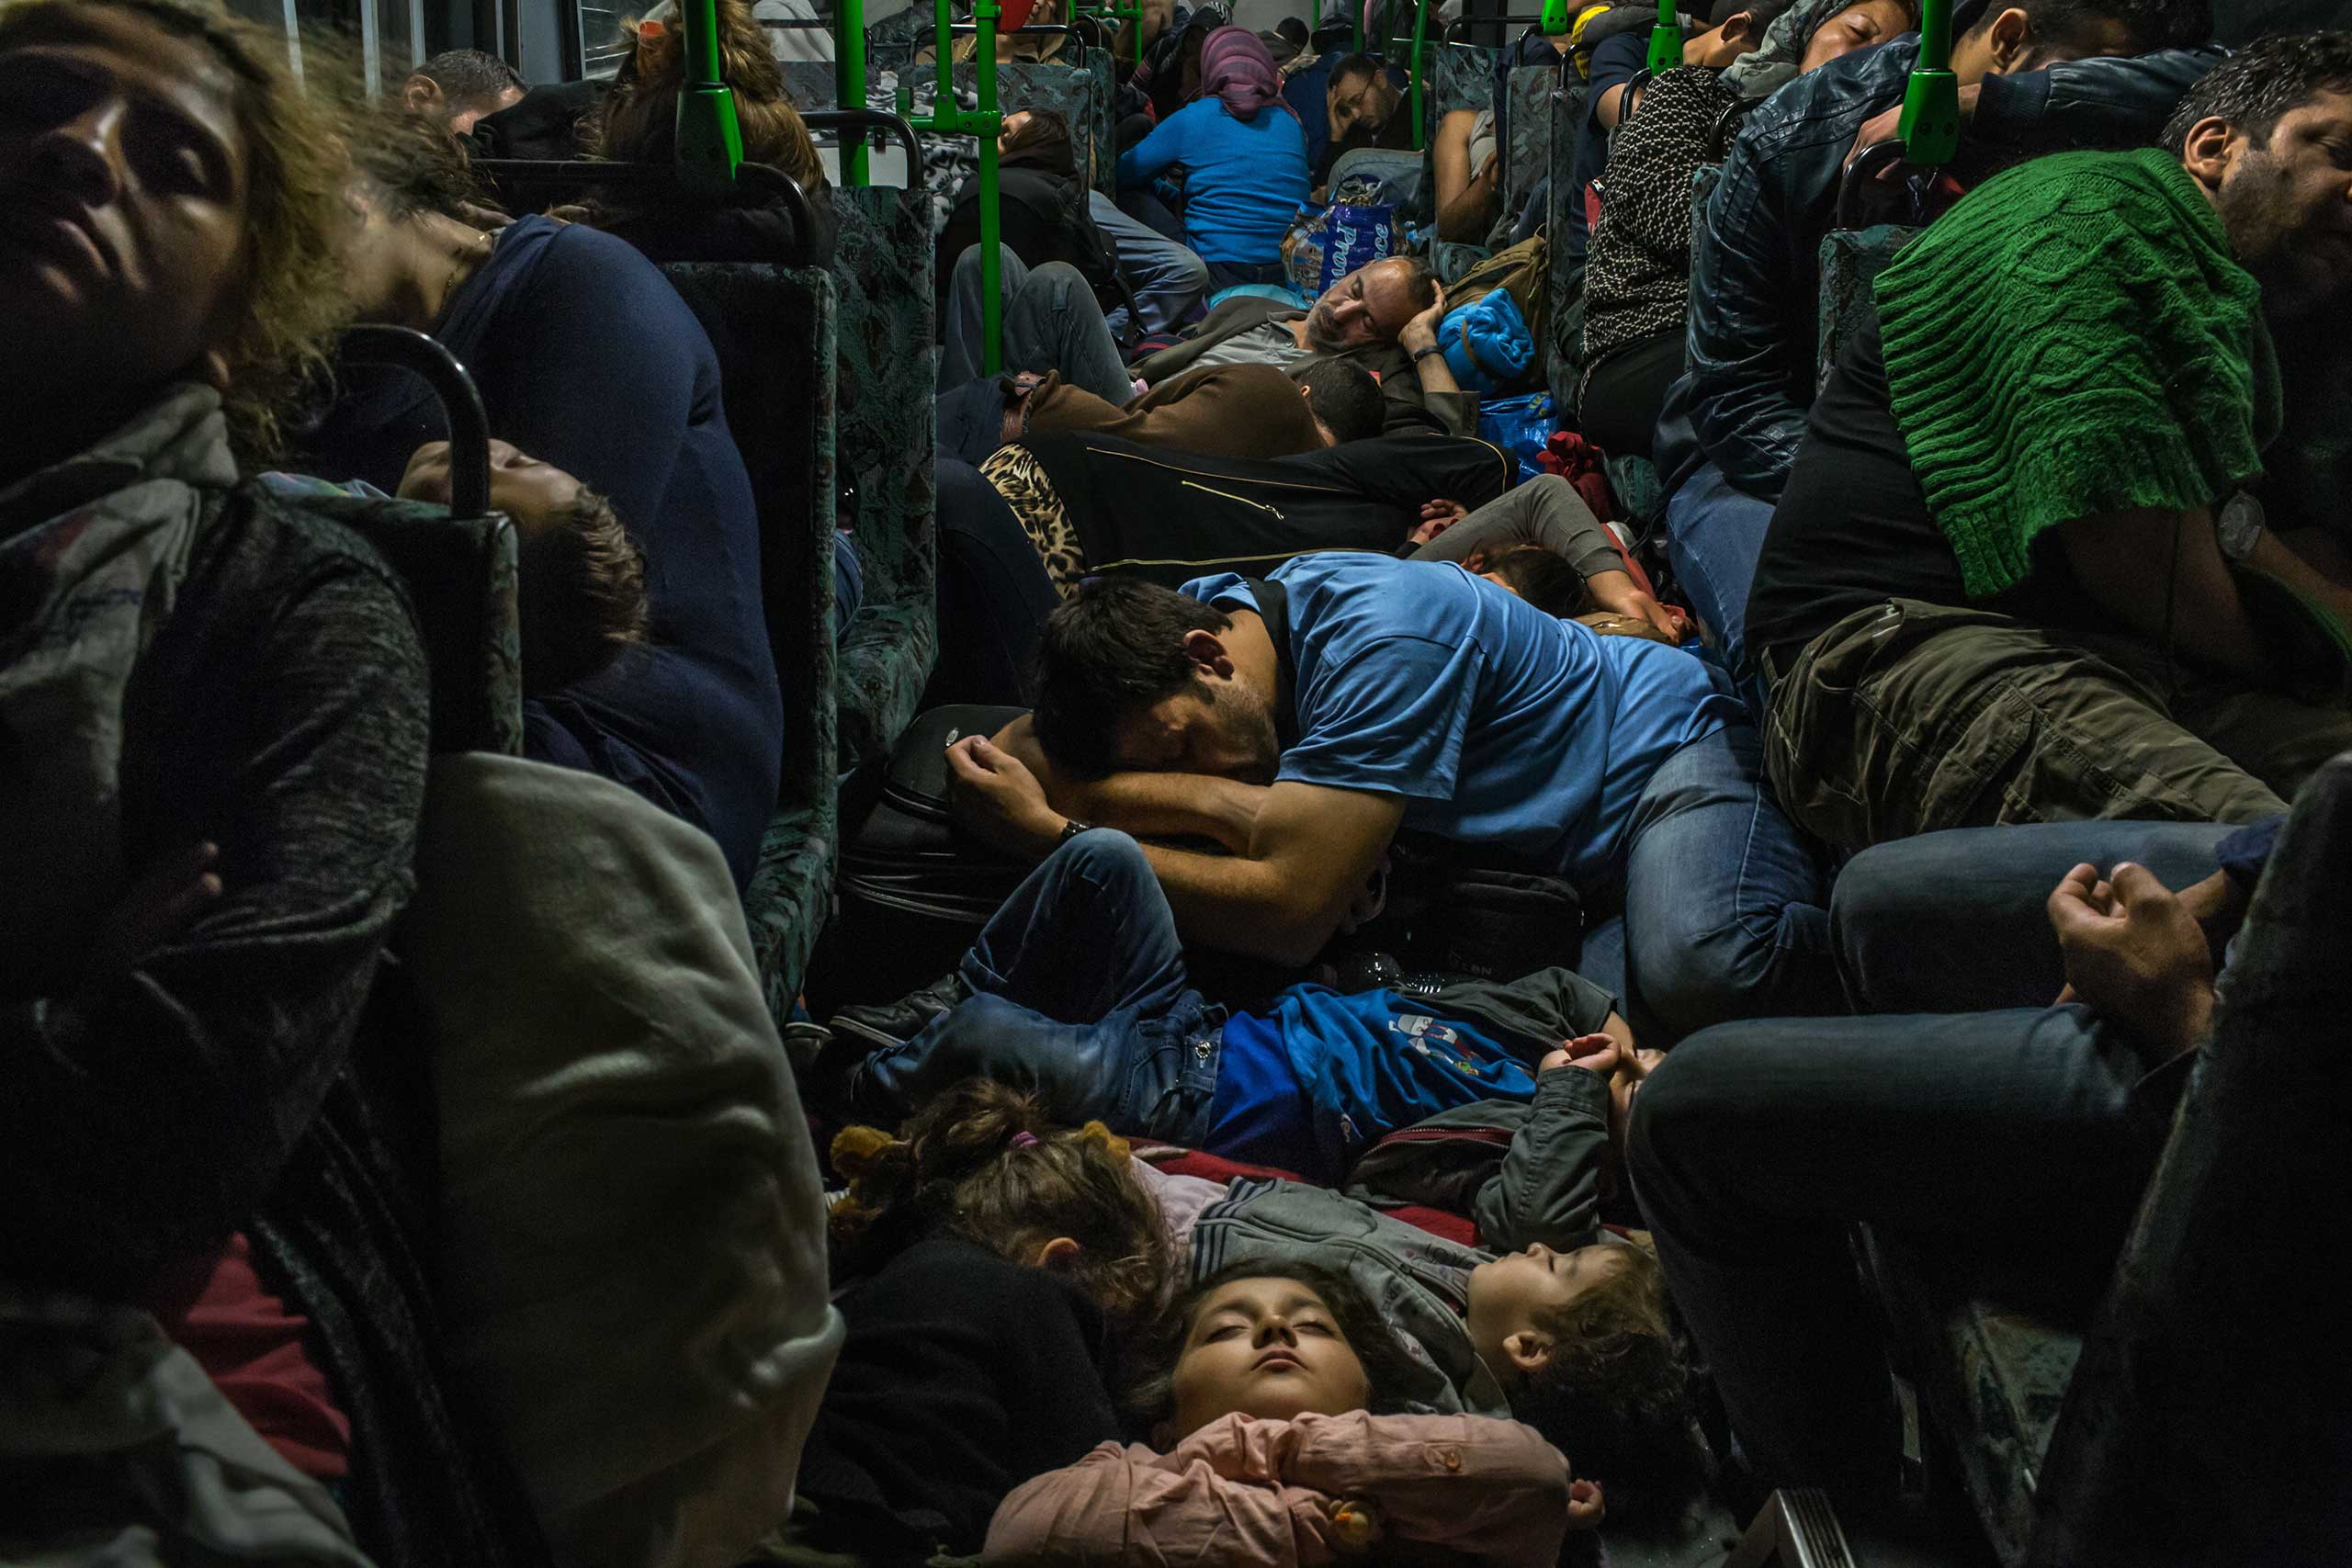 Ahmad Majid, in blue T-shirt at center, sleeps on a bus floor with his children, his brother Farid Majid, in green sweater at right, and other members of their family and dozens of other refugees, after leaving Budapest on the way to Vienna. Sept. 5, 2015.